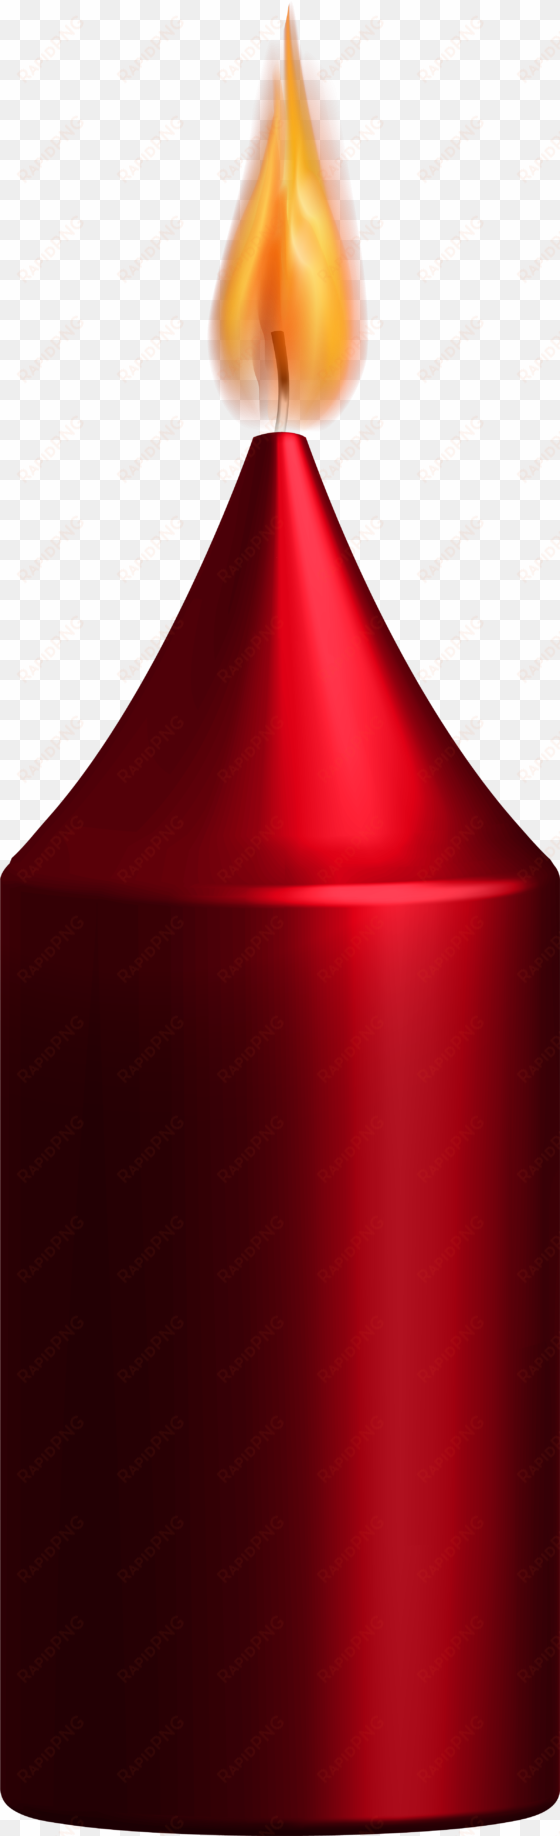 red candle png clip art - red candle clipart